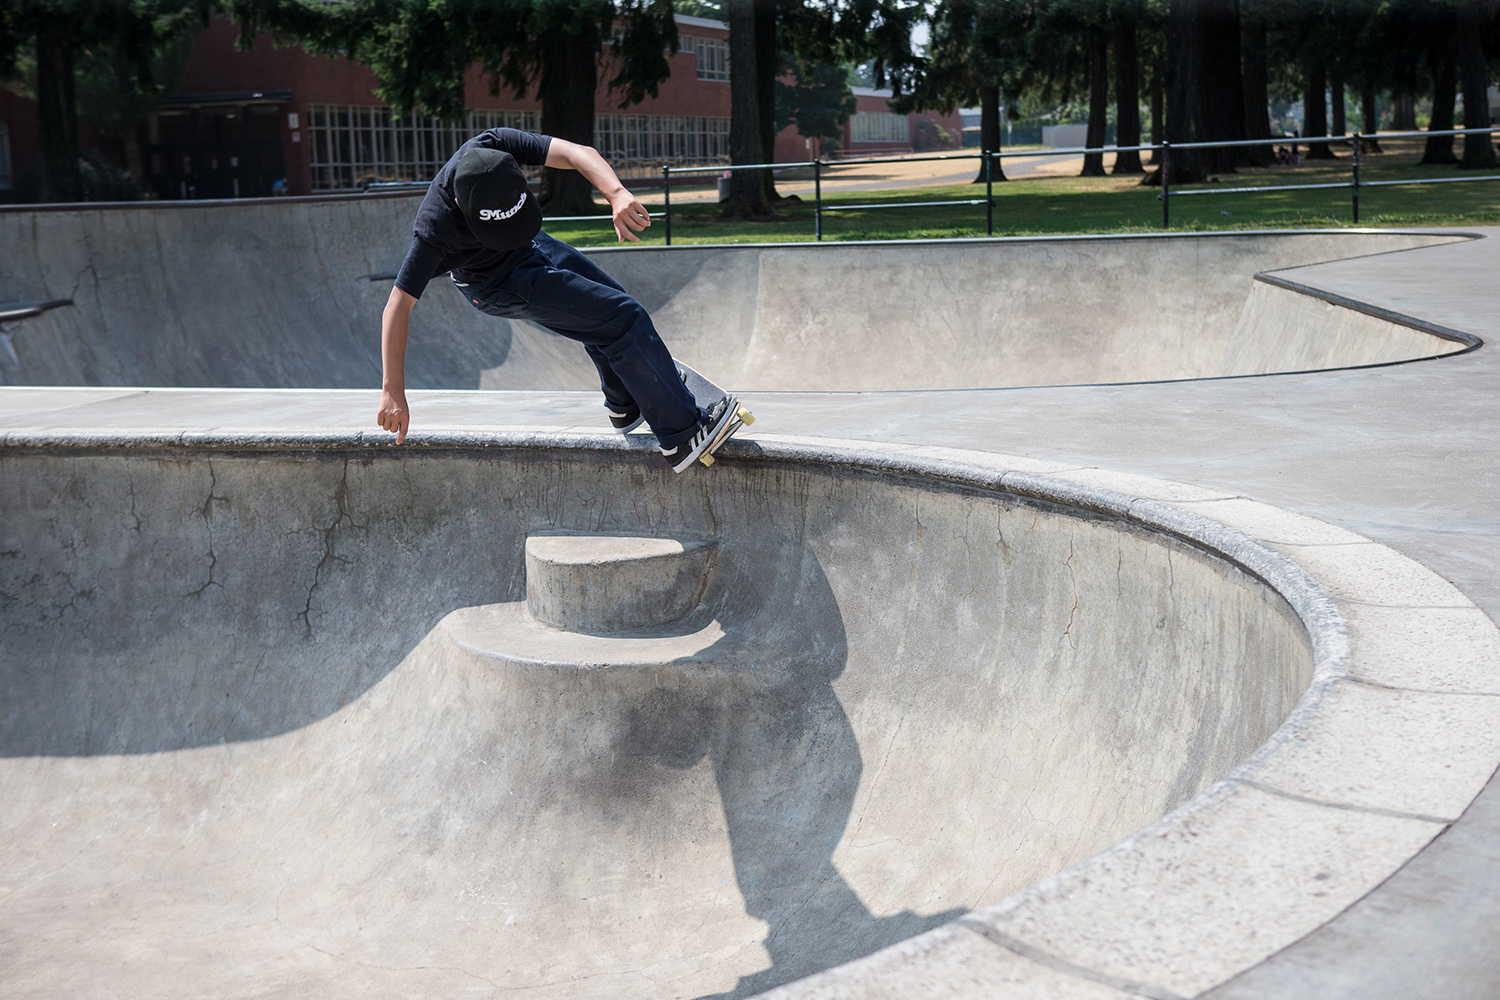  Visiting from Japan, Souta Tomikawa enjoys the authentic pool coping of the Peanut Bowl at Glenhaven Skatepark. 